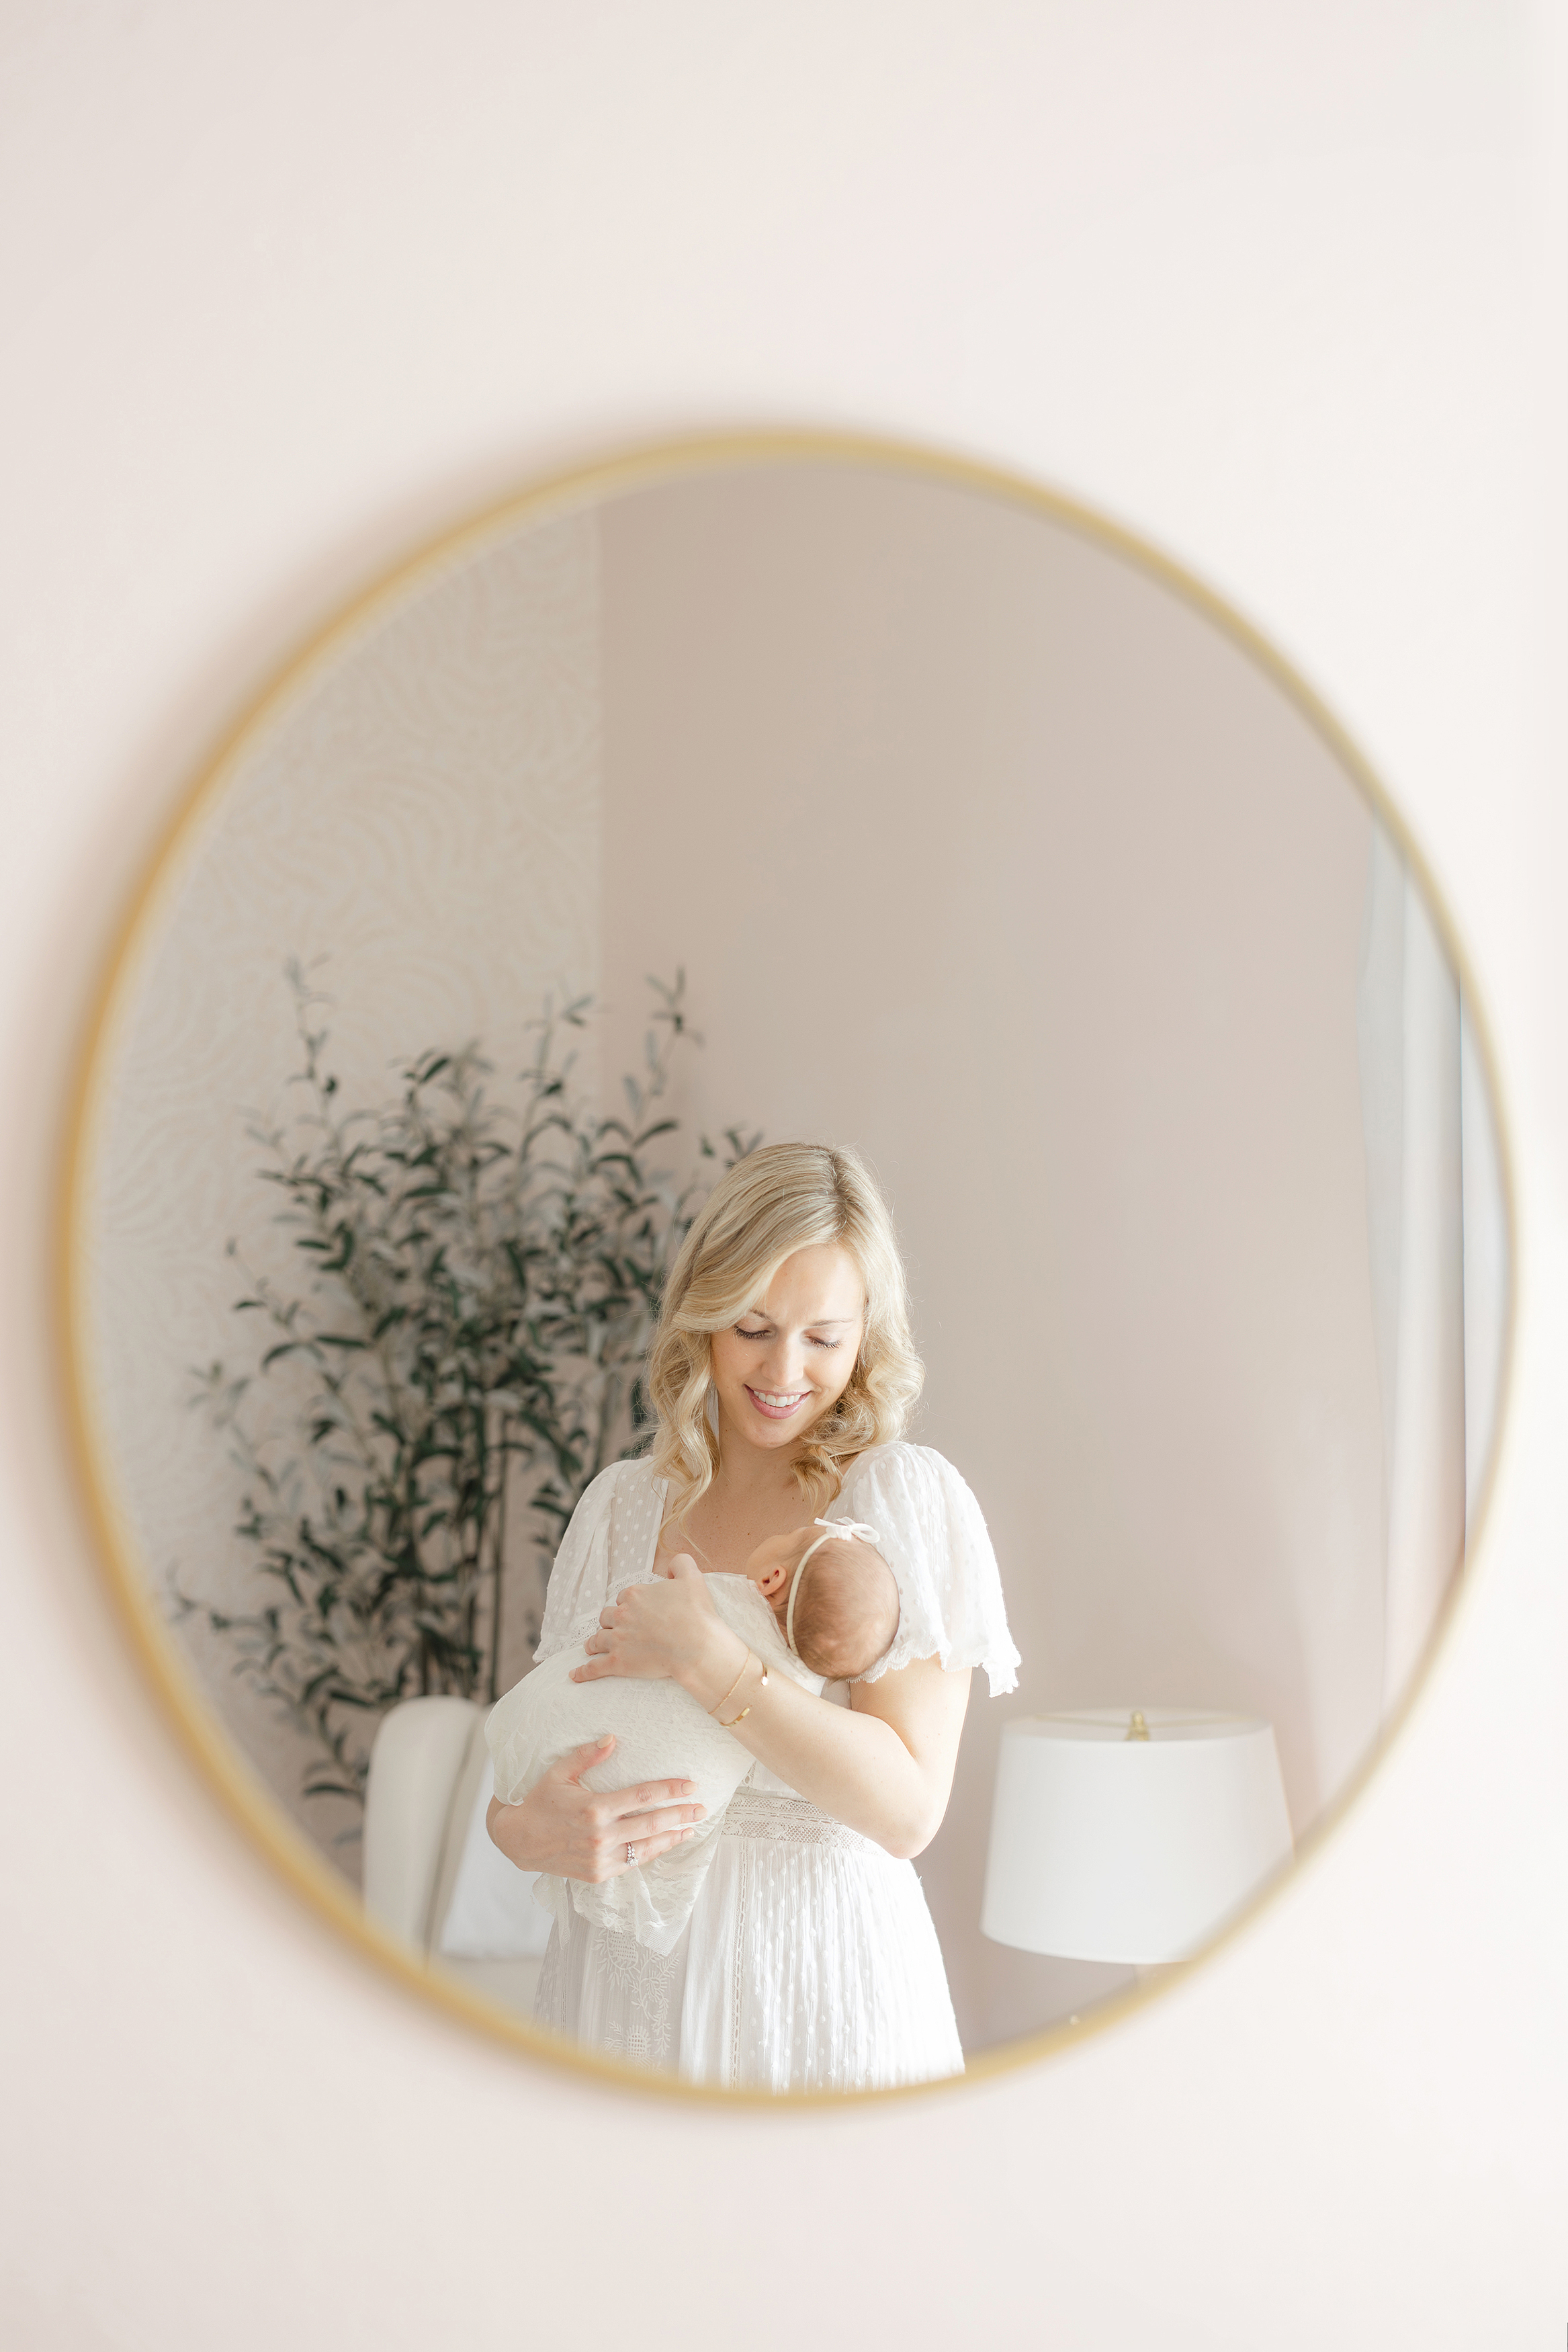 A blonde woman in a white lace dress holding a newborn baby girl in front of a mirror.